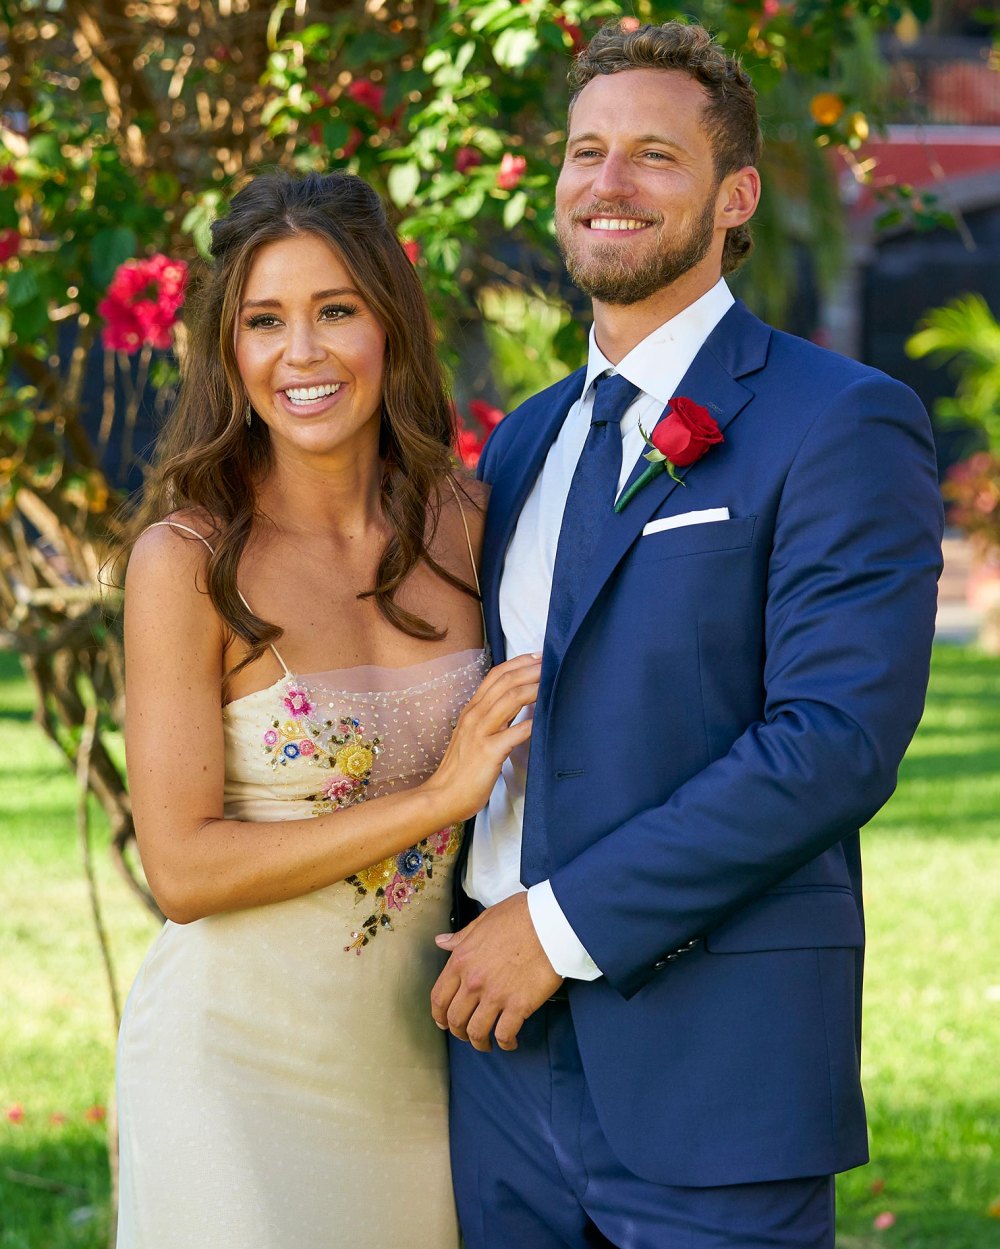 Bachelorette Gabby Windey Says Ex-Fiance Erich Schwer Doesn’t Know She’s Now Dating a Woman 3